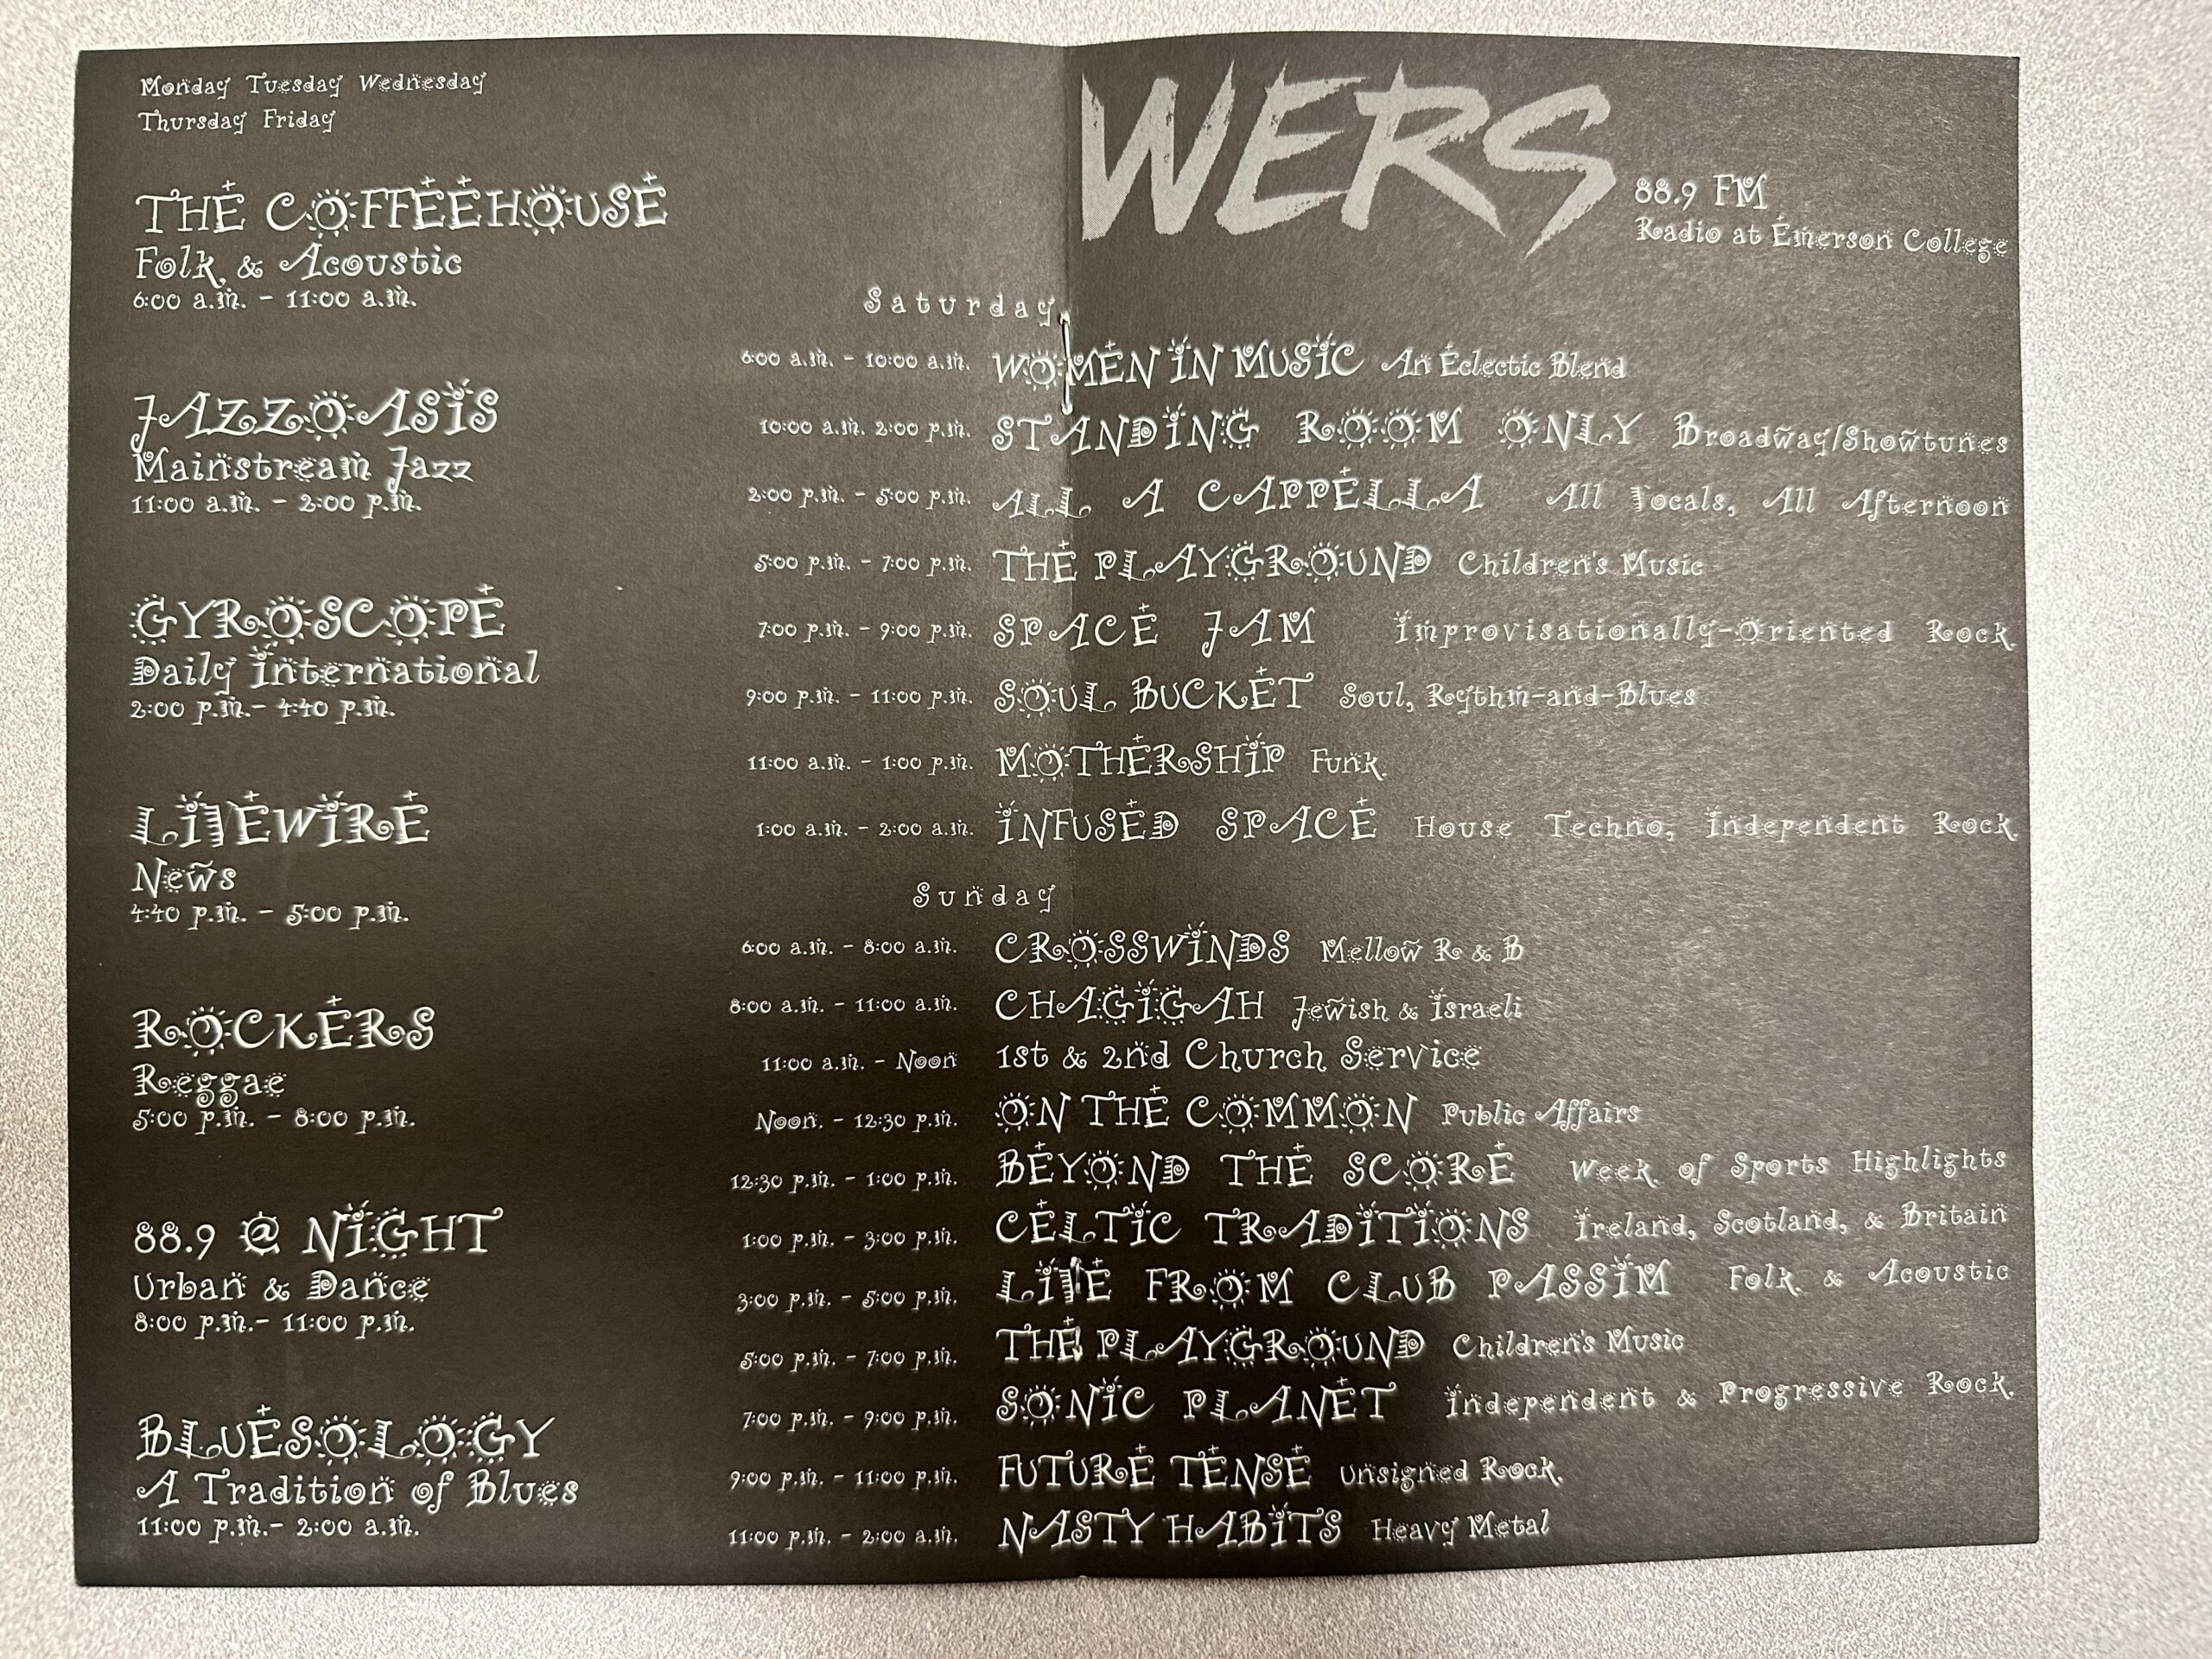 A print-out of WERS' programming schedule in Spring 1996.